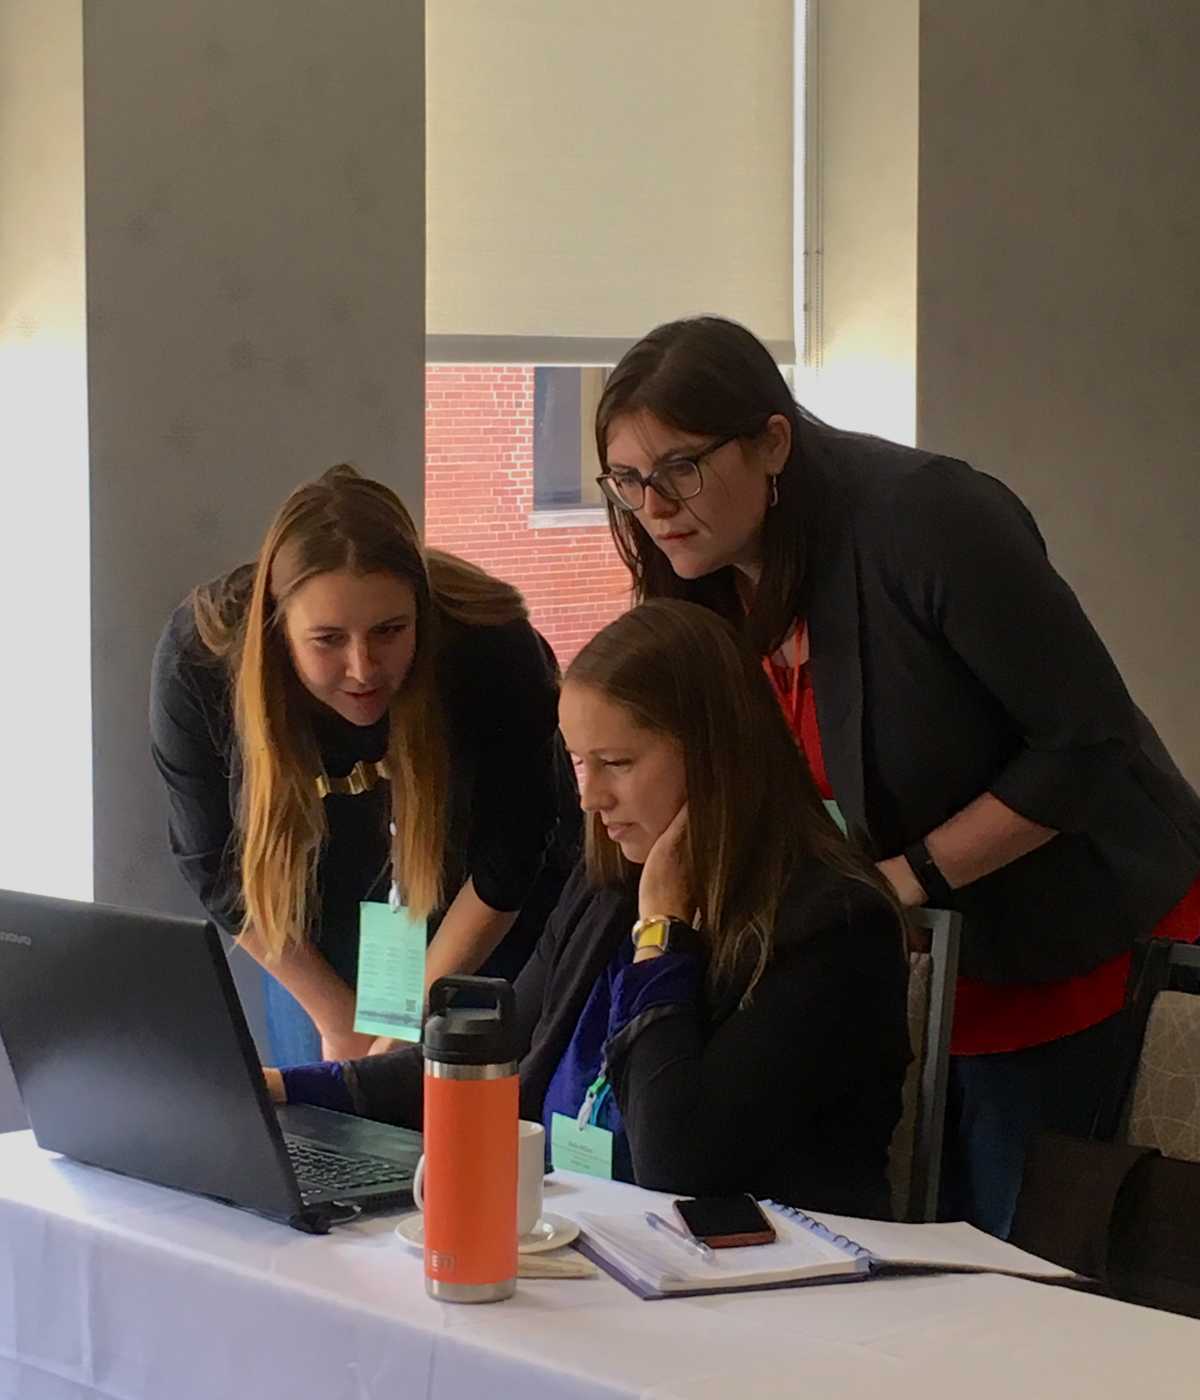 Chelsea Lobson, Emma Wattie, and Keila Miller looking at Atlantic DataStream on a laptop during a datathon